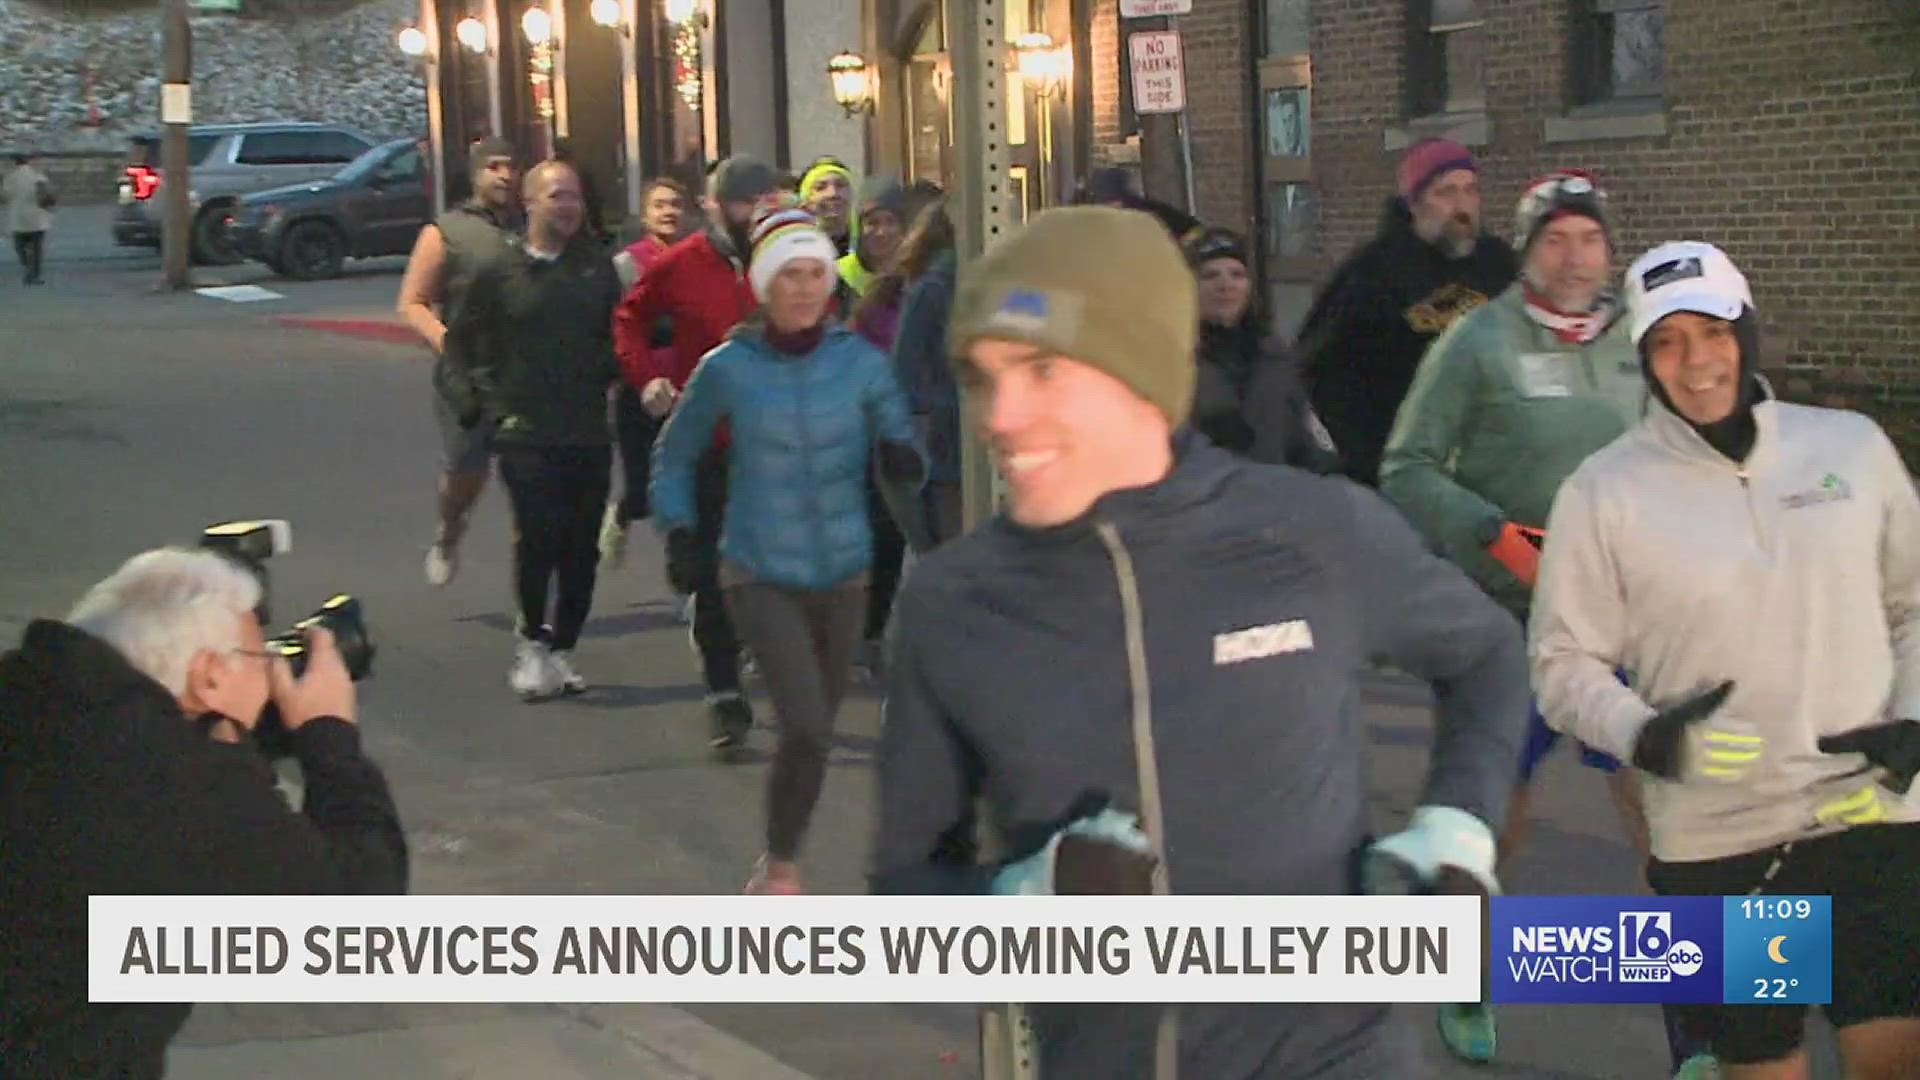 The cold weather didn't stop people from going on a run Wednesday in Pittston. Allied Services hosted a launch event for the Wyoming Valley Run, a new 10-mile race.